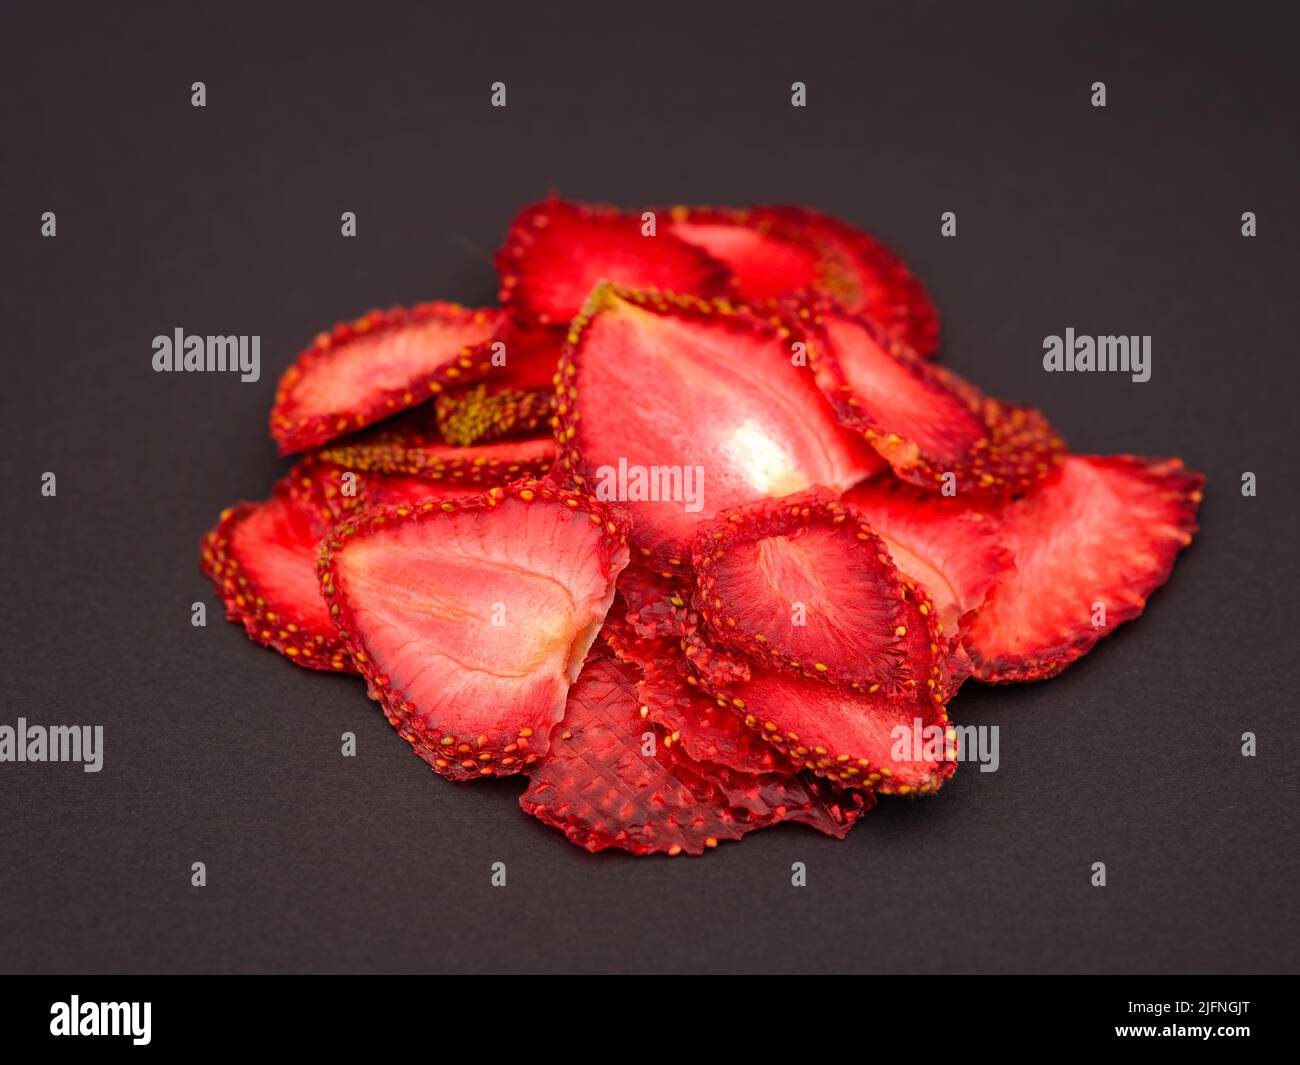 Dried strawberry slices on a black background Stock Photo